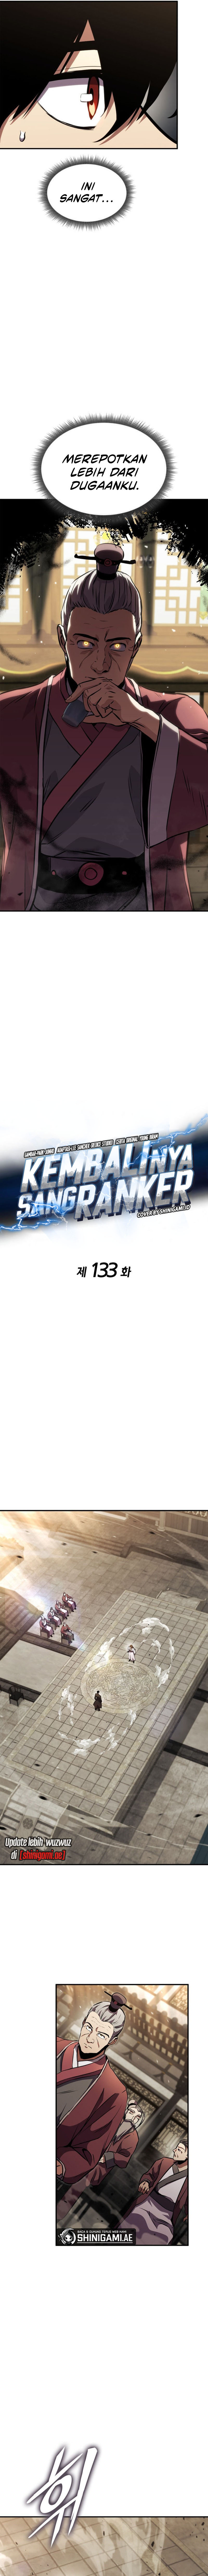 rankers-return Chapter 133